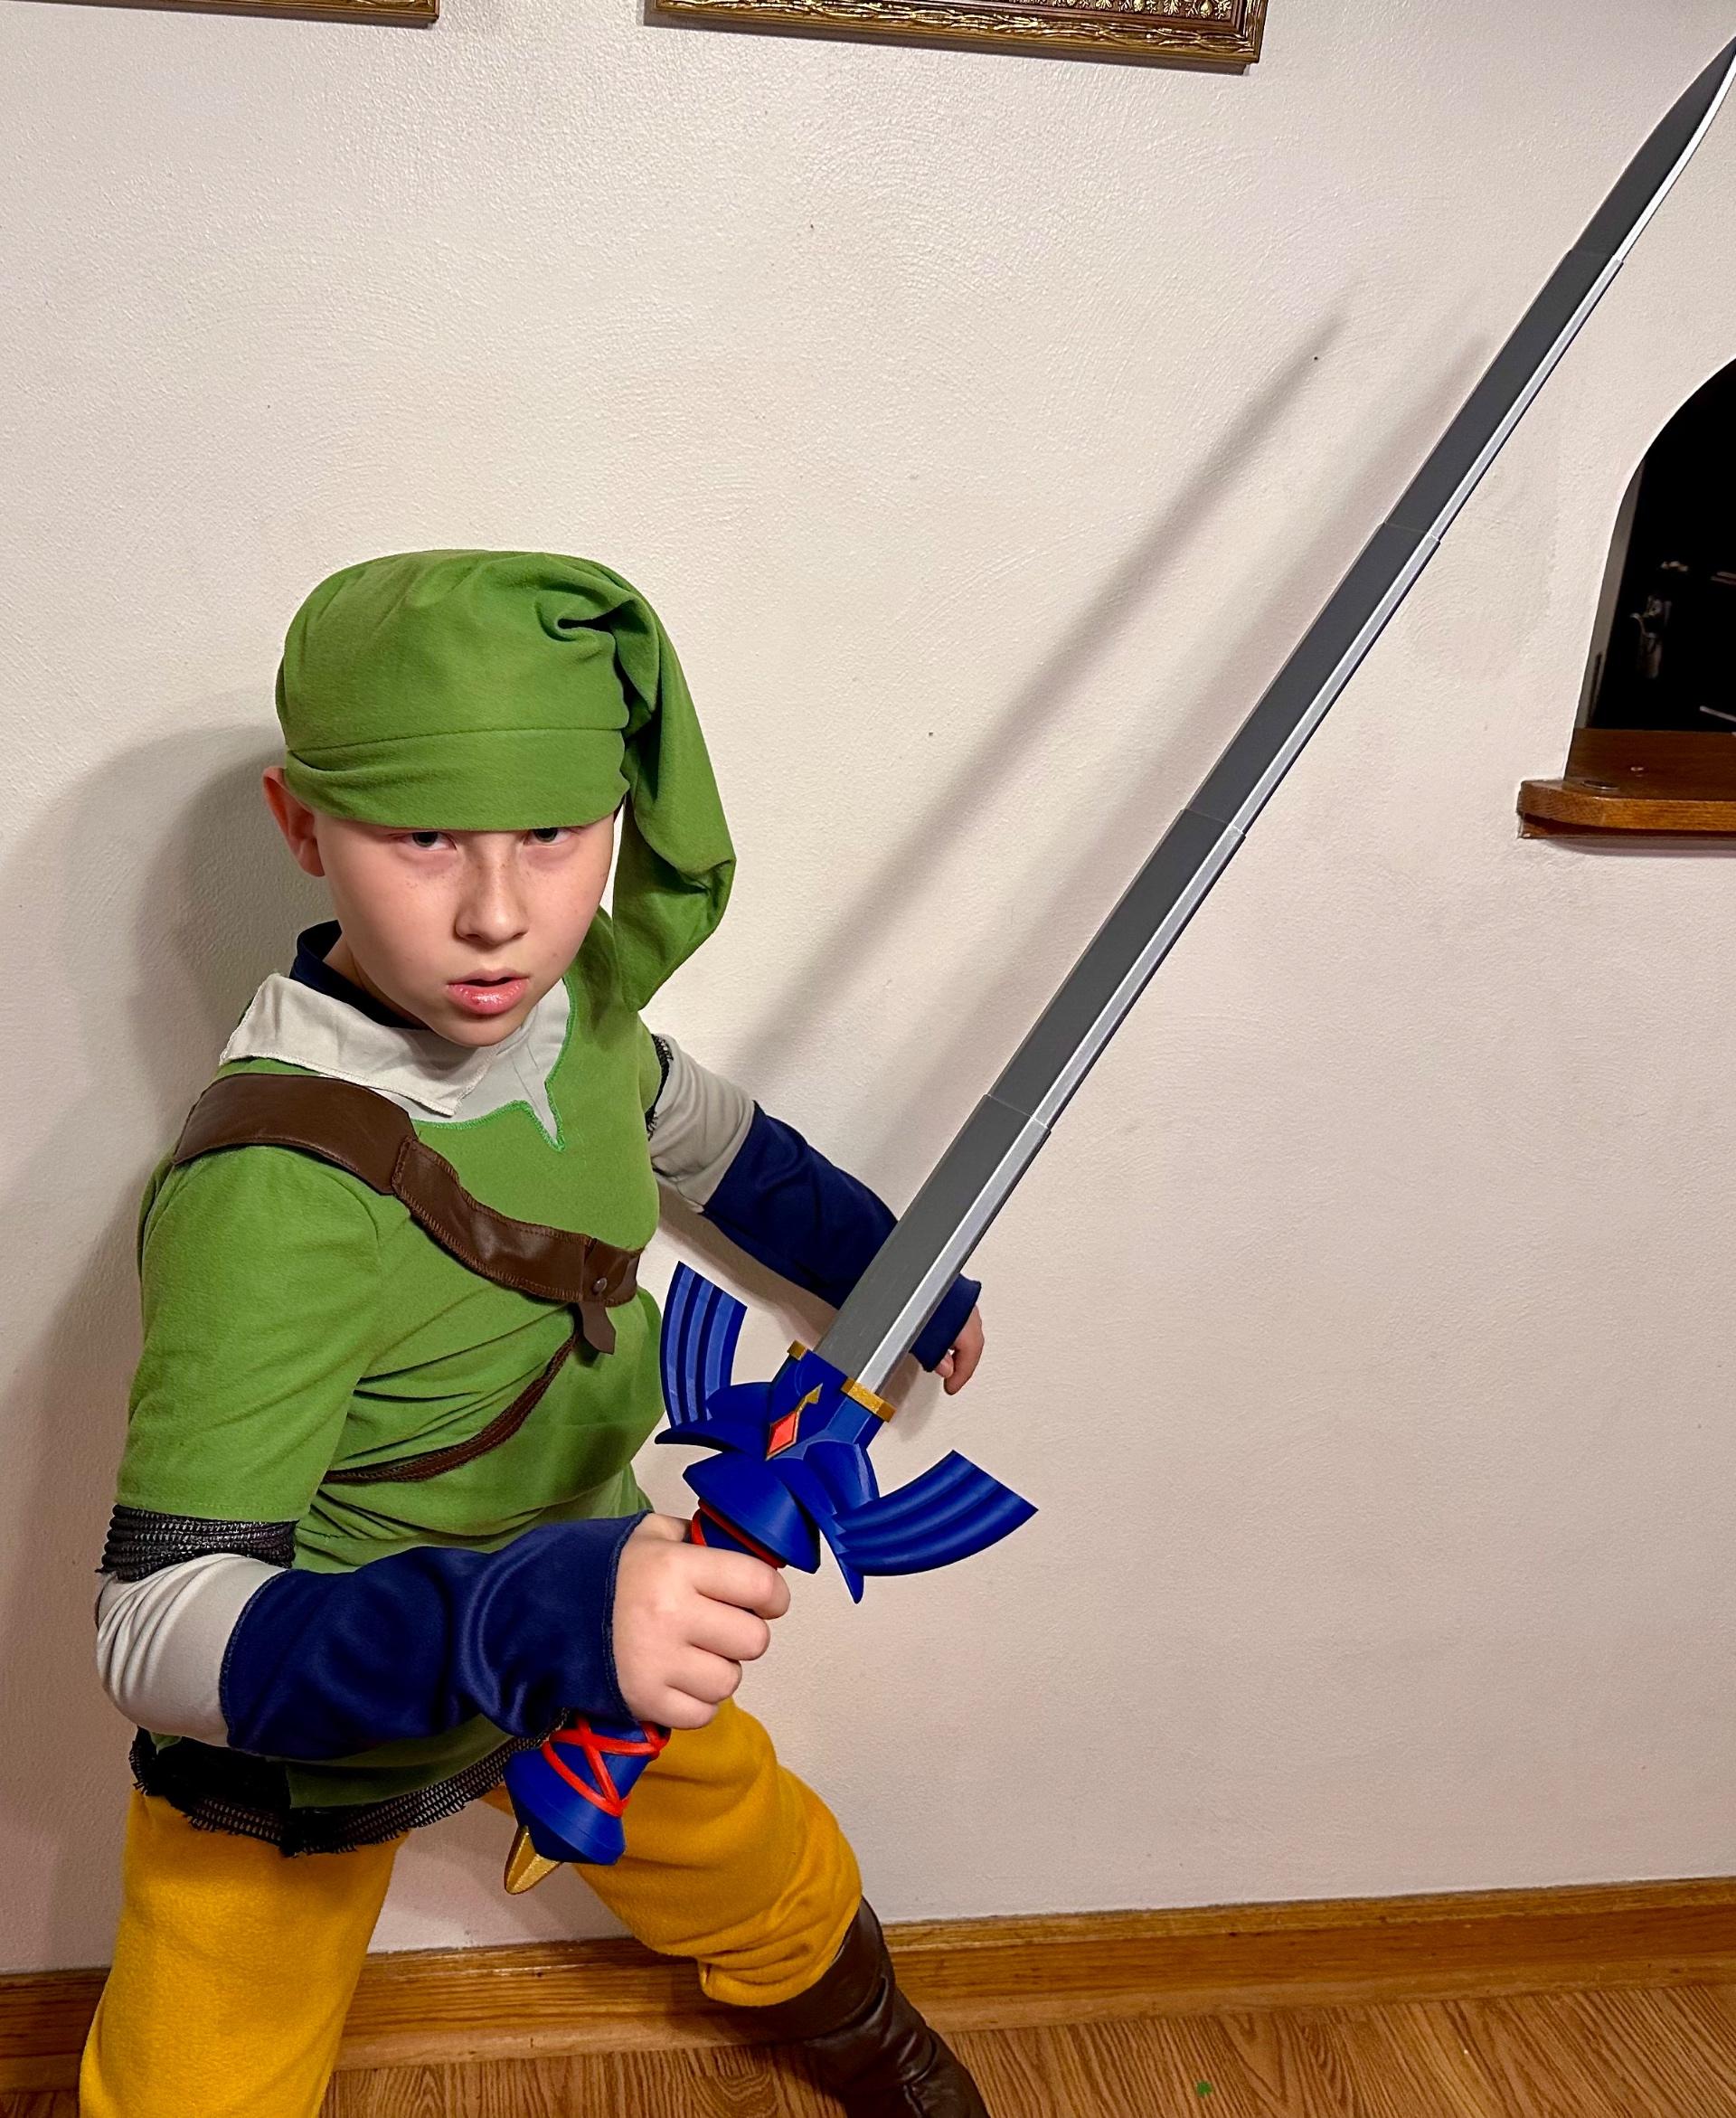 Collapsing Master Sword with Replaceable Blade - My son absolutely loves it, great model! - 3d model